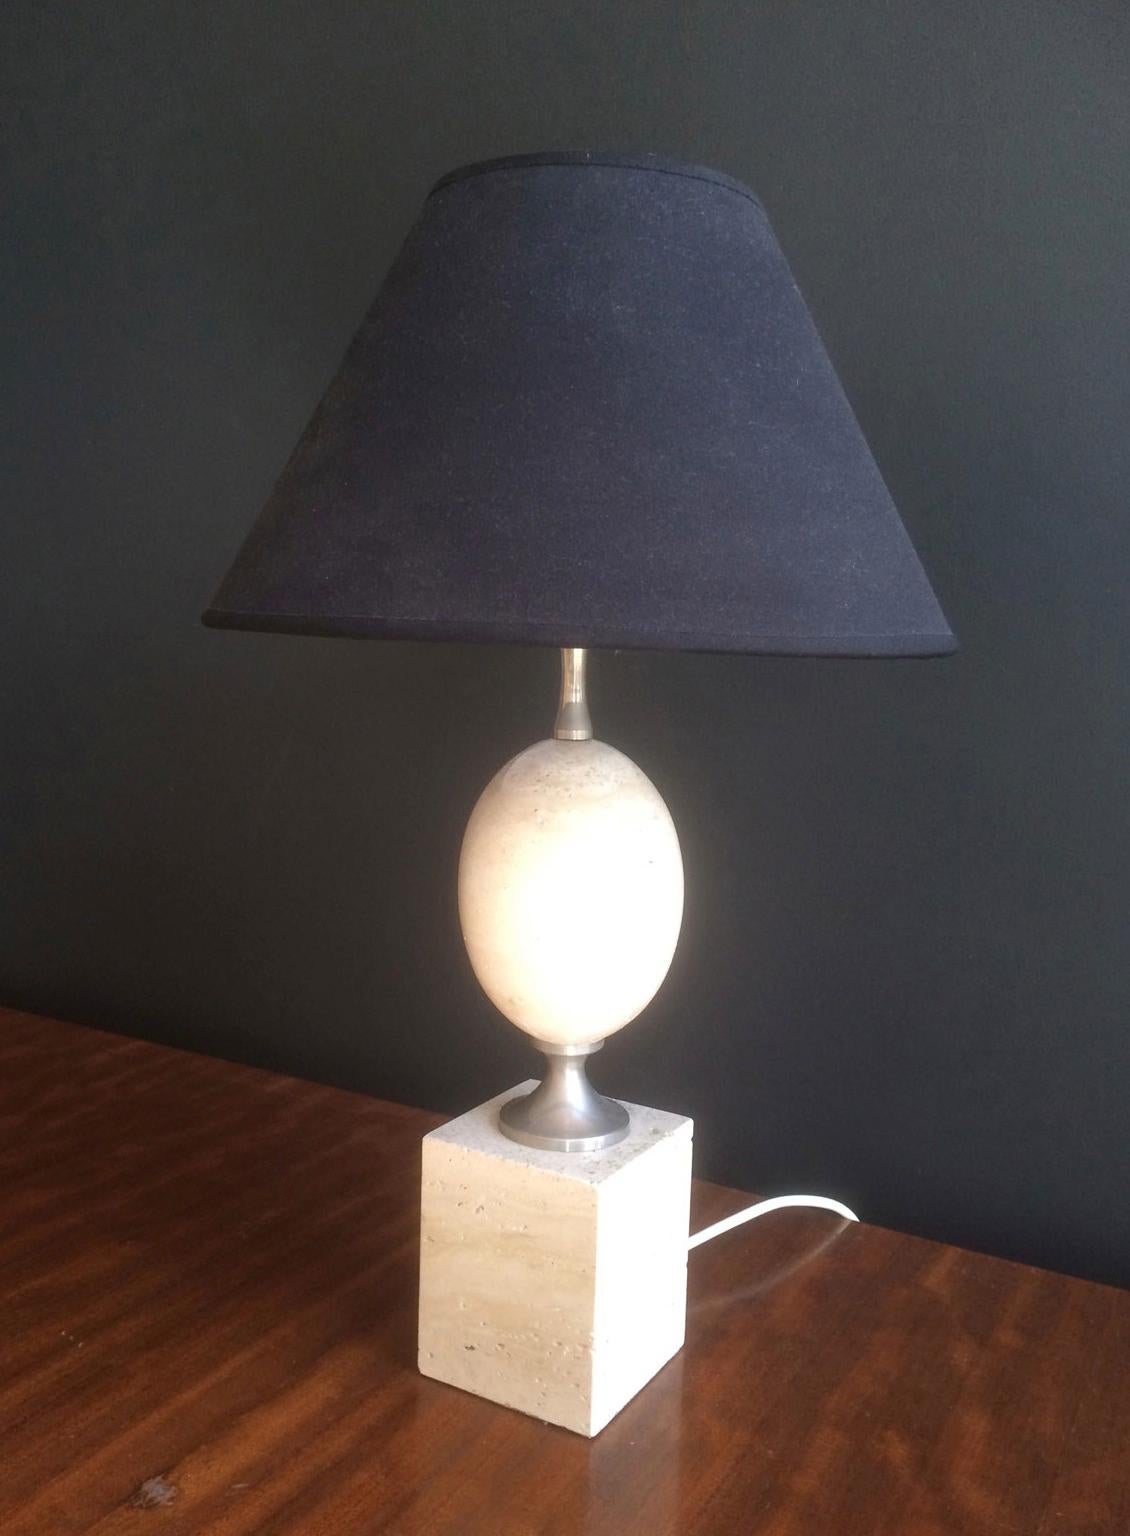 This nice egg lamp is made of travertine and chrome. This is a model by famous designer Philippe Barbier, circa 1970.